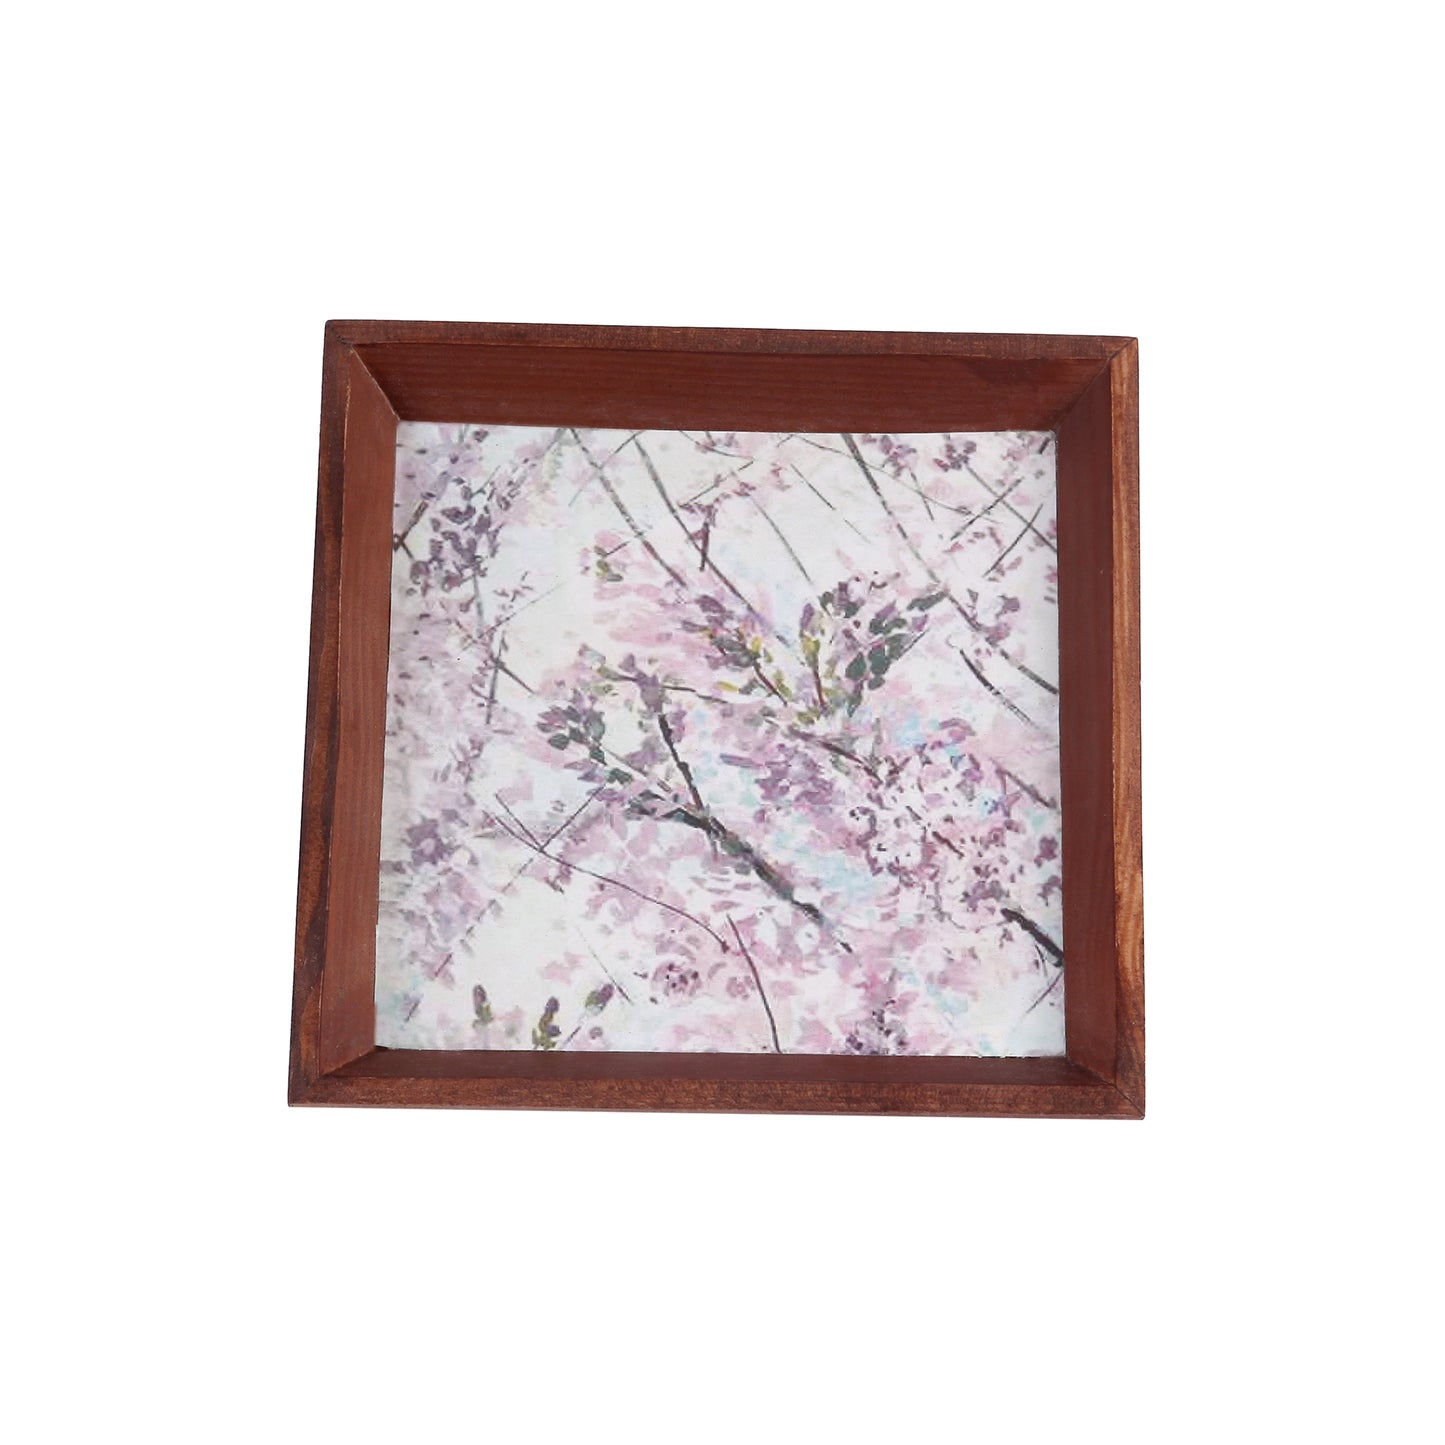 A Tiny Mistake Floral Caricature Trees Small Square Wooden Serving Tray, 18 x 18 x 2 cm